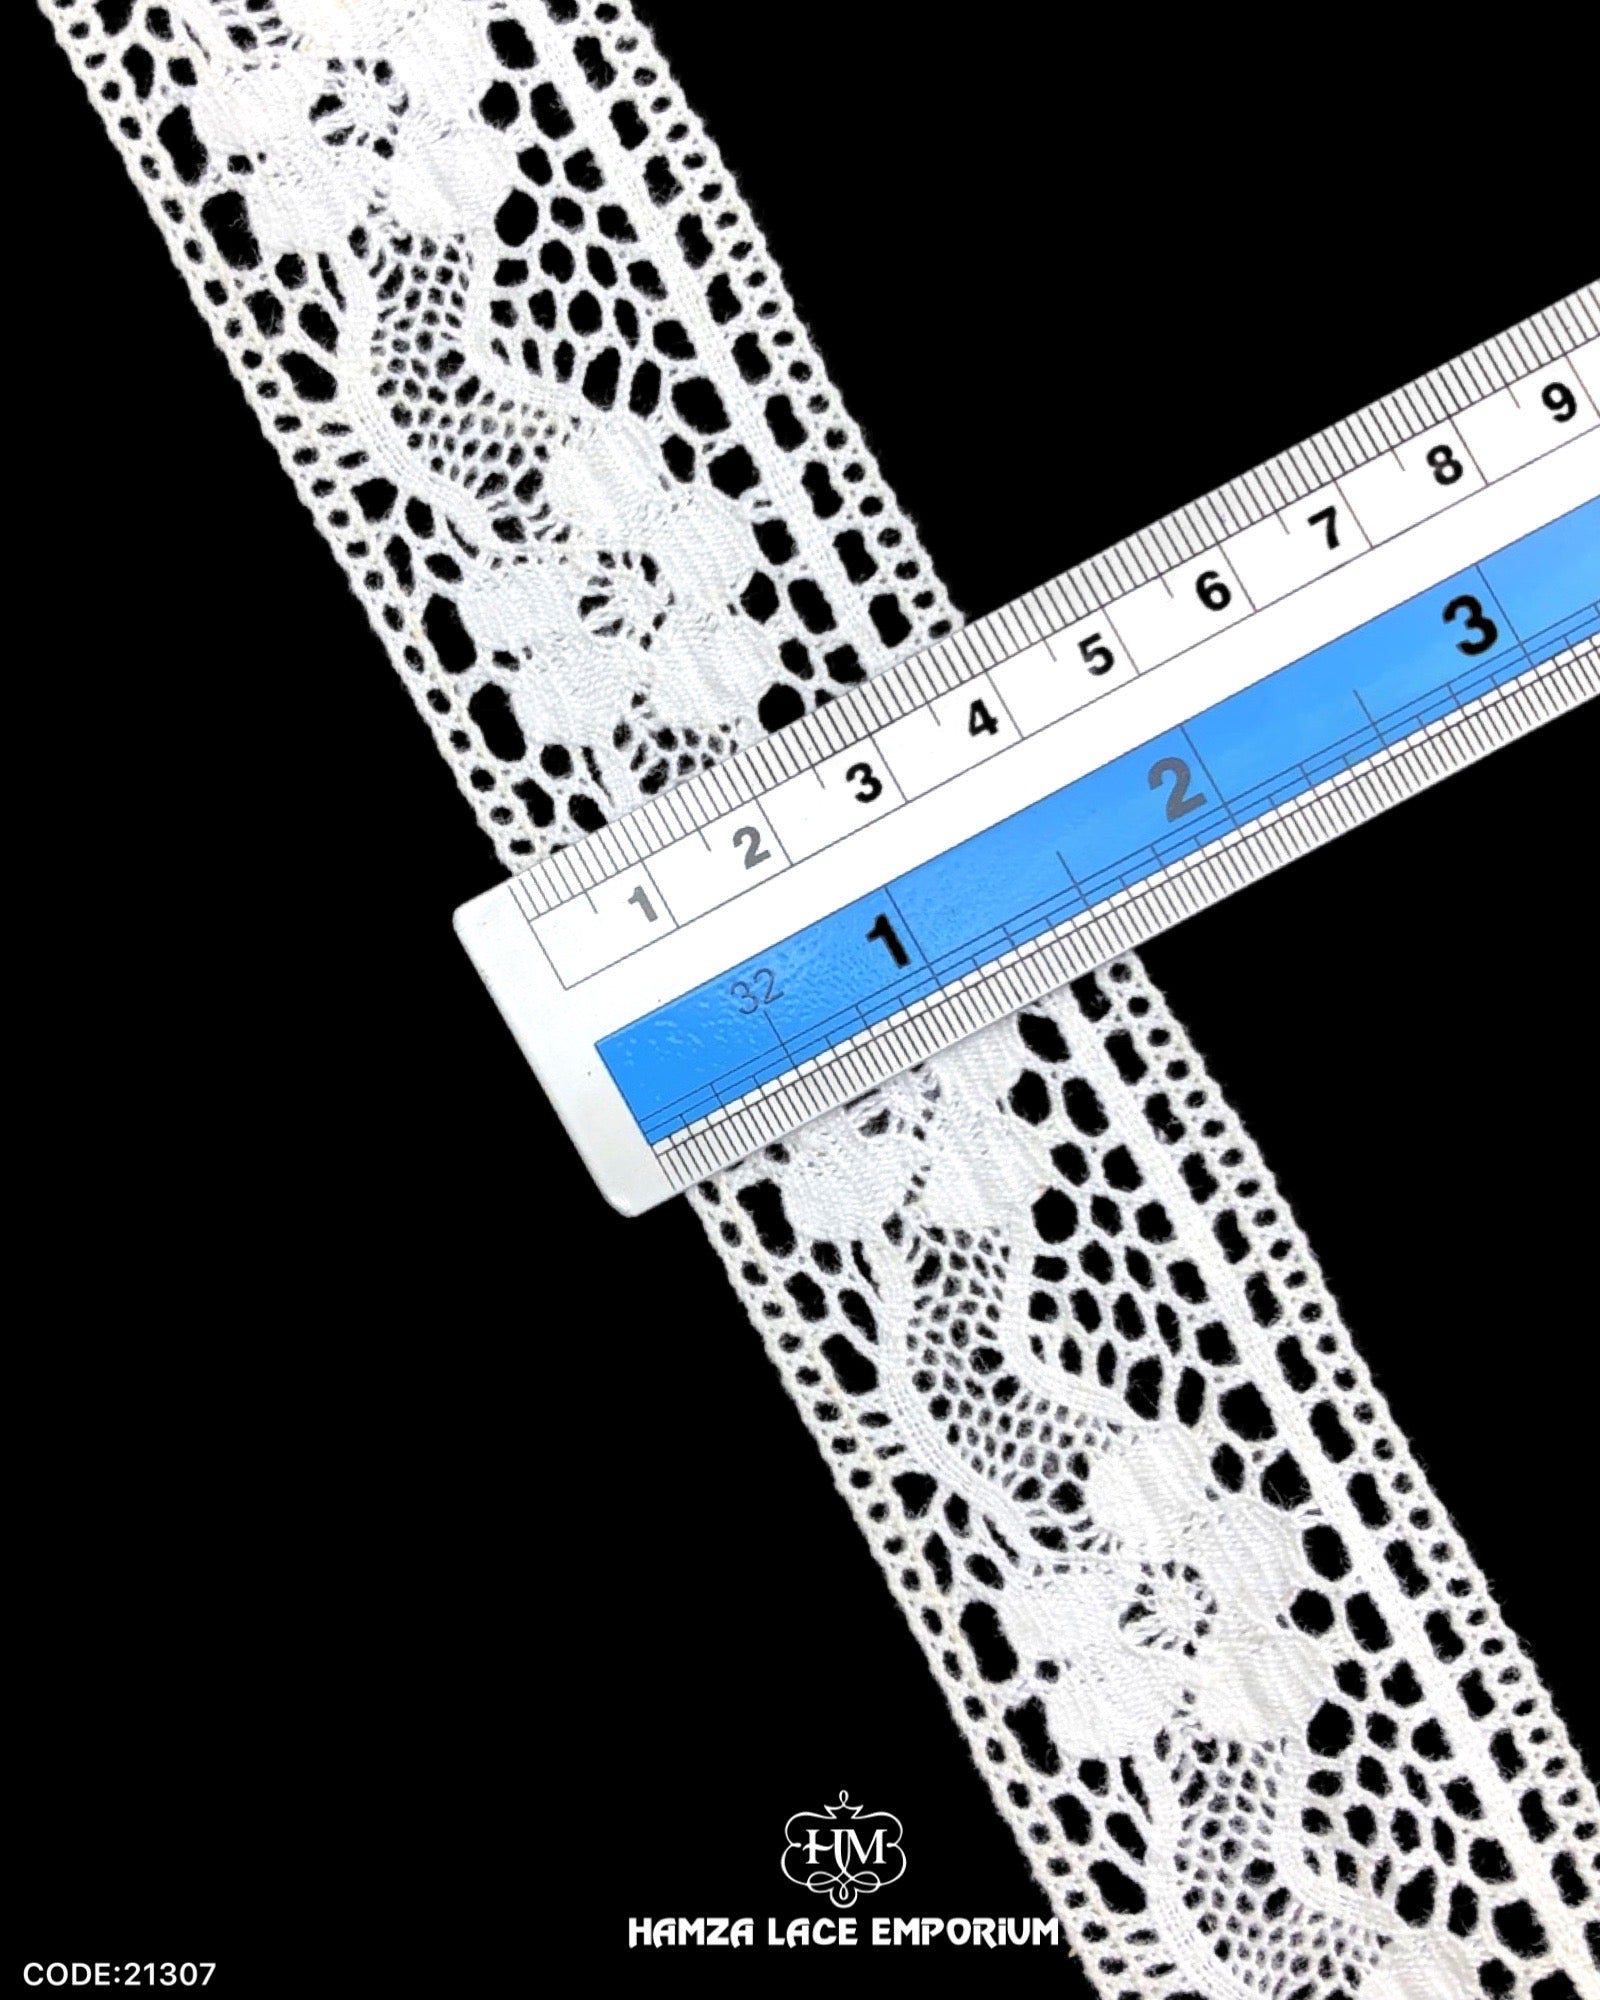 Size of the 'Center Filling Crochet Lace 21307' is shown with the help of a ruler as '1.5' inches